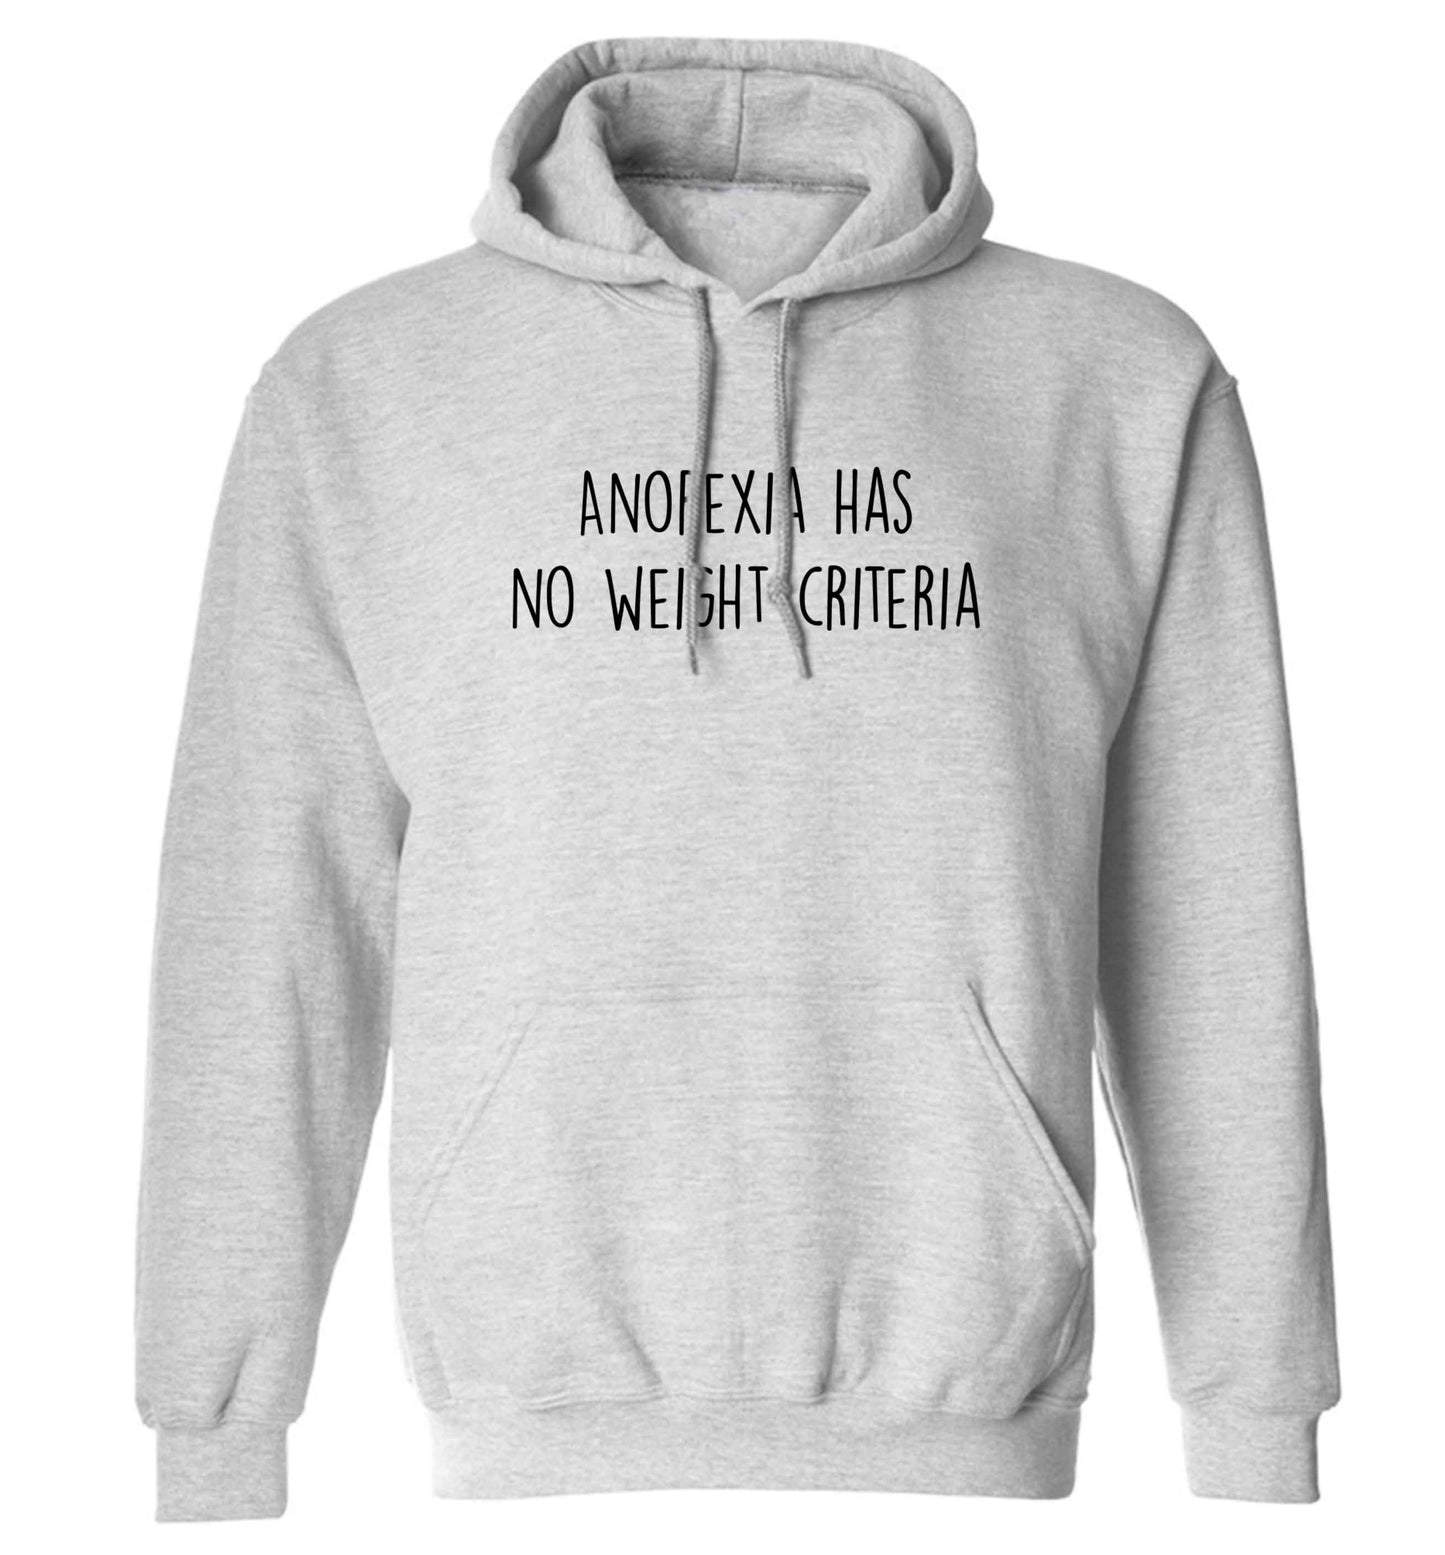 Anorexia has no weight criteria adults unisex grey hoodie 2XL